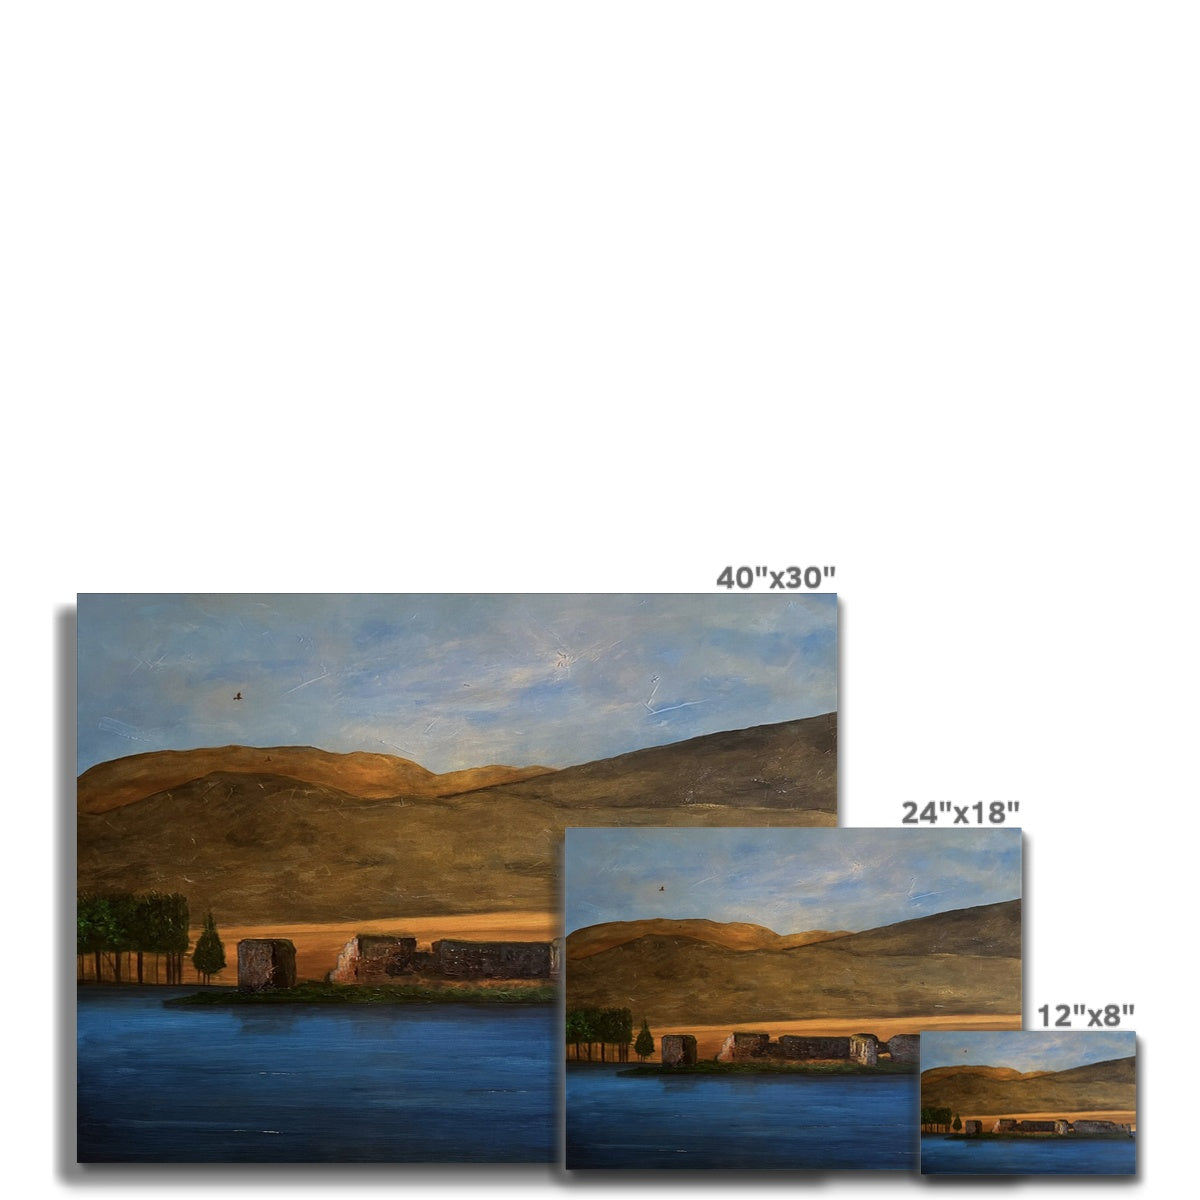 Lochindorb Castle Painting | Canvas From Scotland-Contemporary Stretched Canvas Prints-Scottish Lochs & Mountains Art Gallery-Paintings, Prints, Homeware, Art Gifts From Scotland By Scottish Artist Kevin Hunter